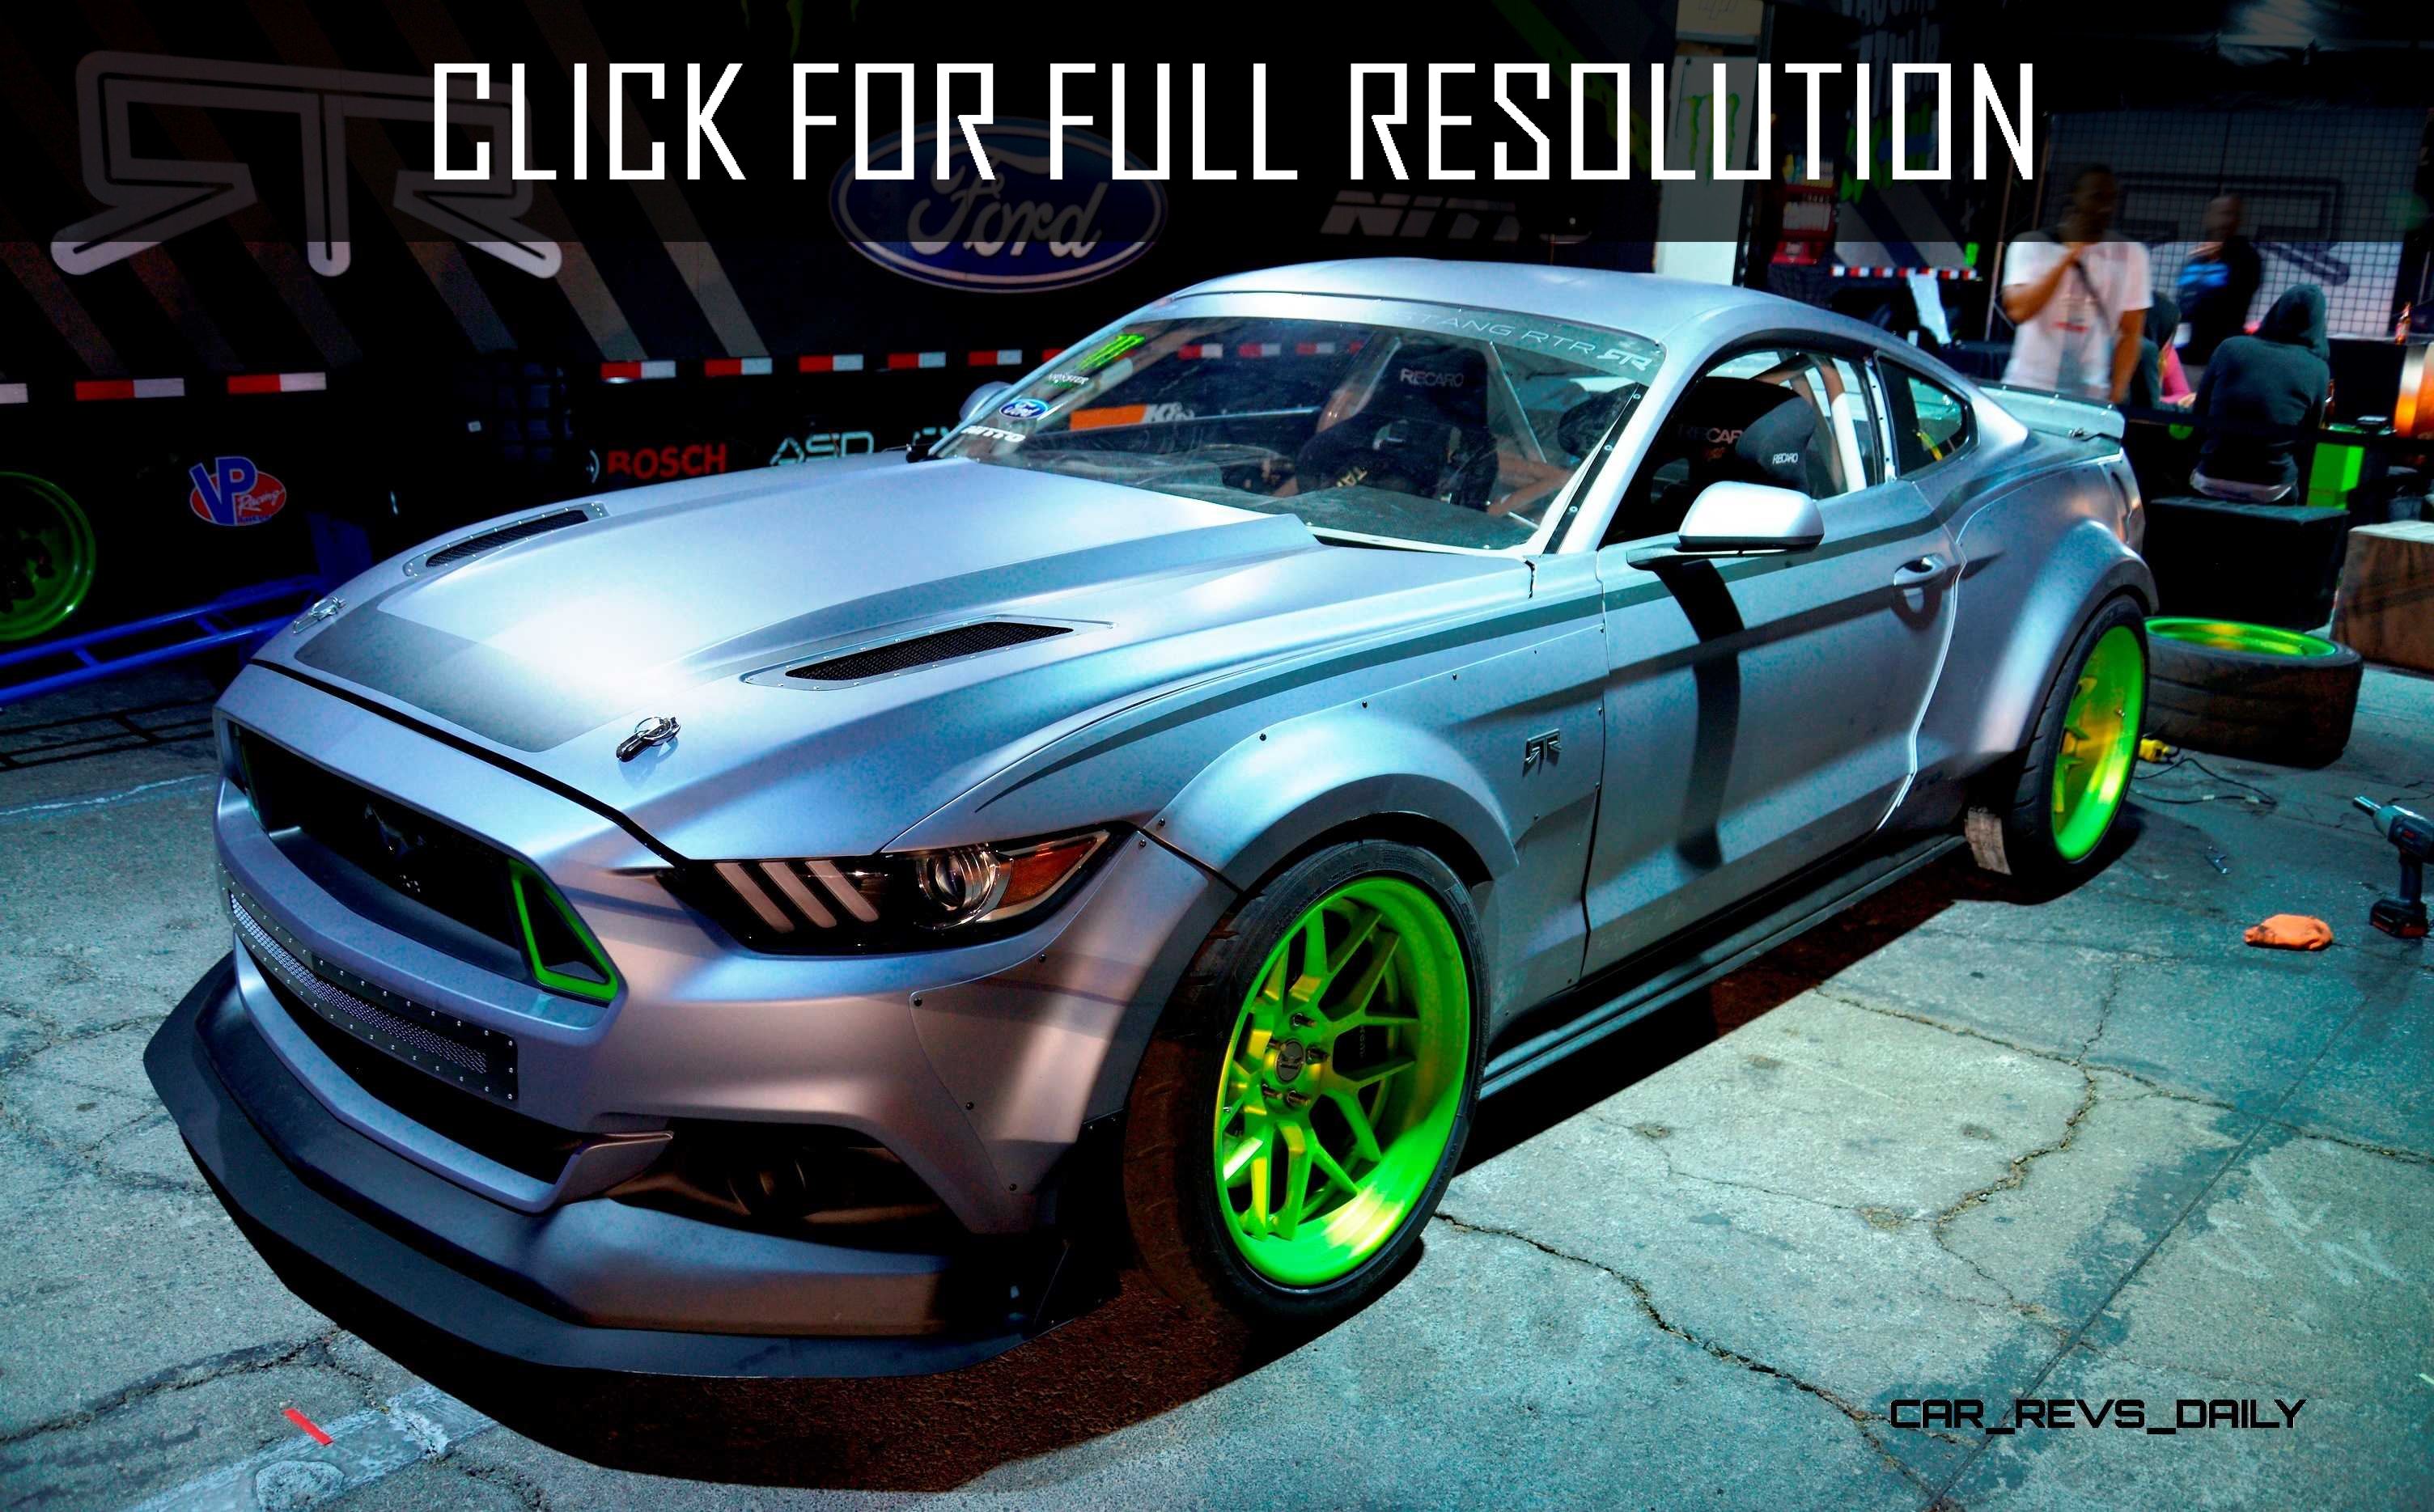 Ford Mustang Rtr 2015